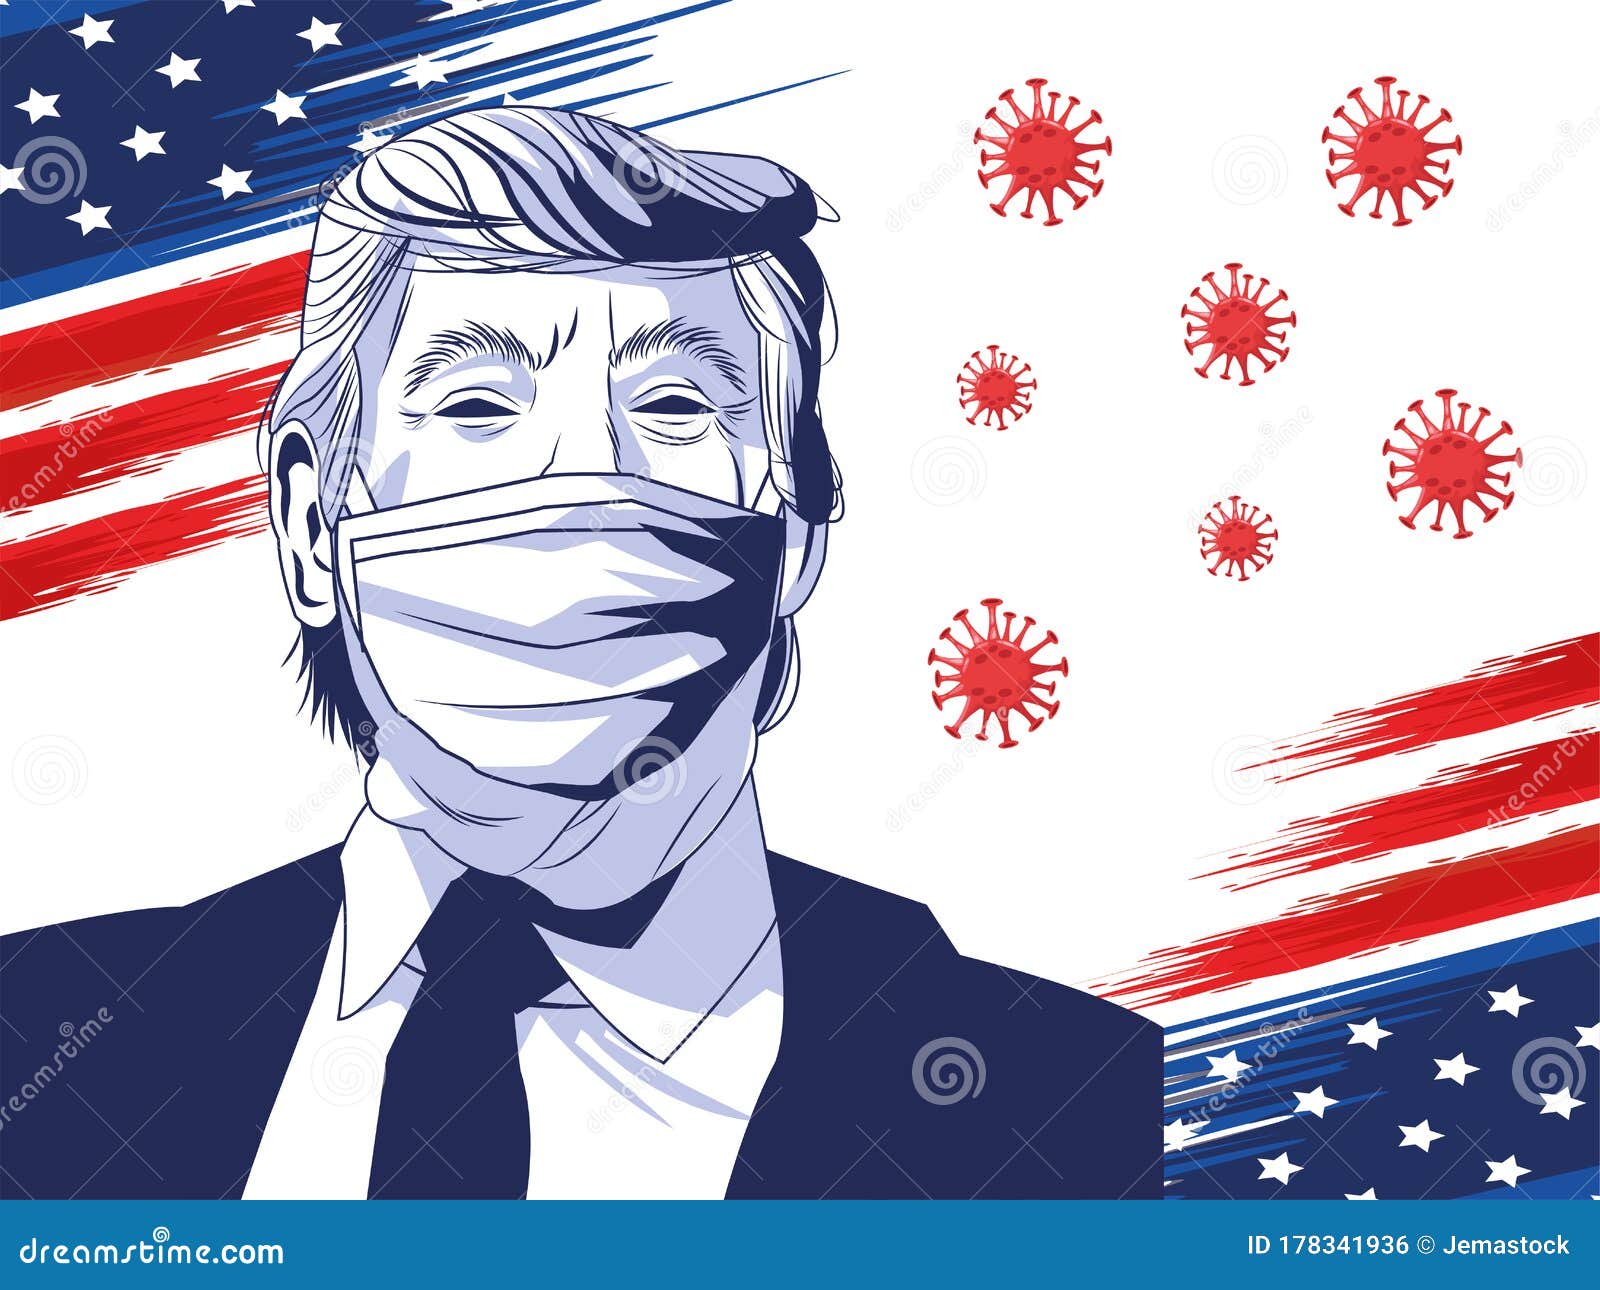 Trump Wearing Face Mask by Covid 19 with Usa Flag and Particles ...